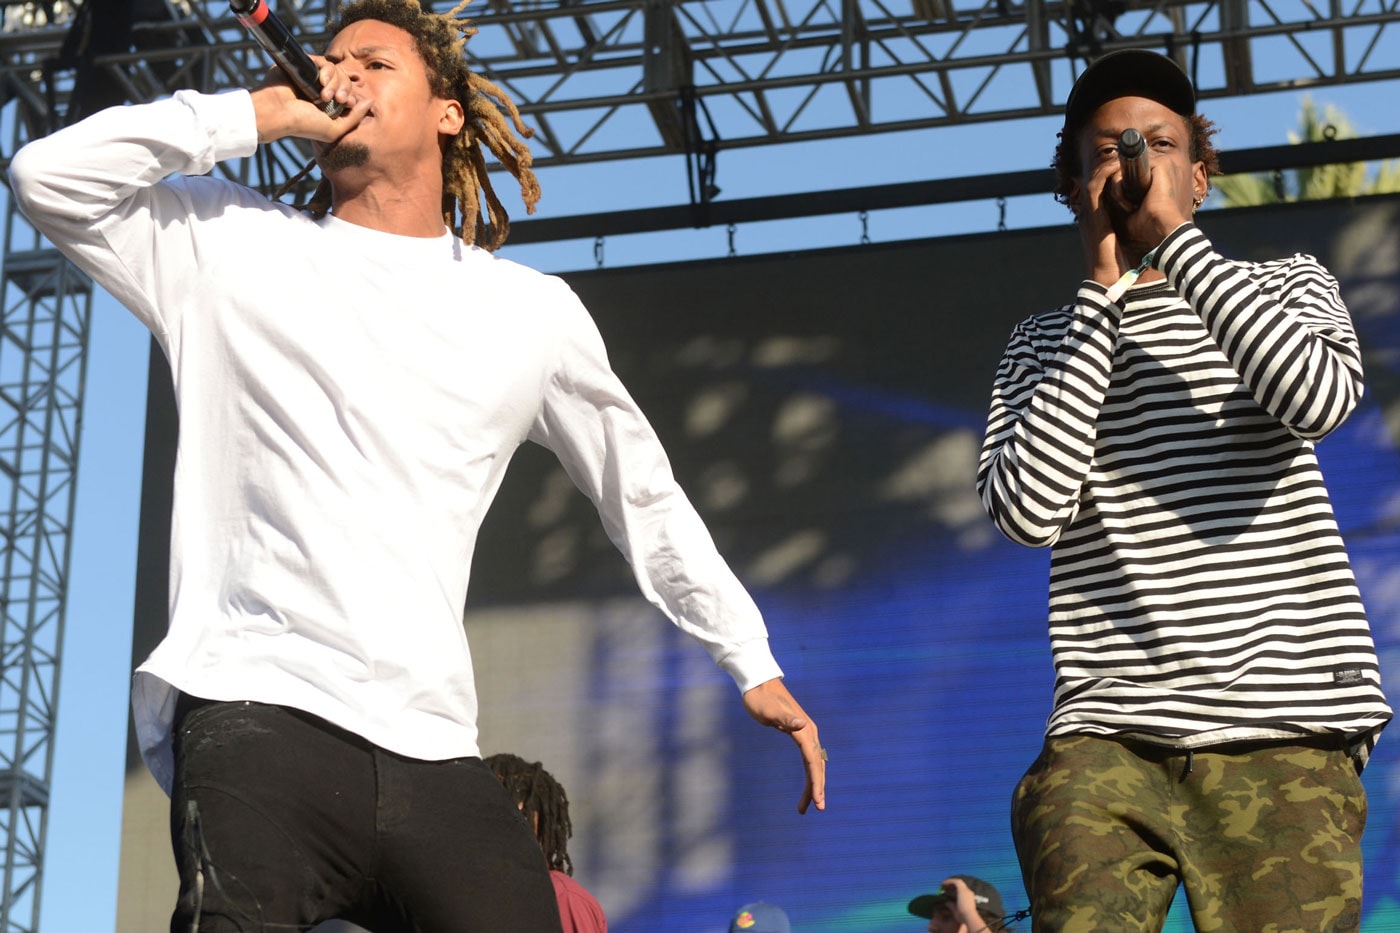 The Underachievers Share Two-Part Video, "Star Signs/Generation Z"